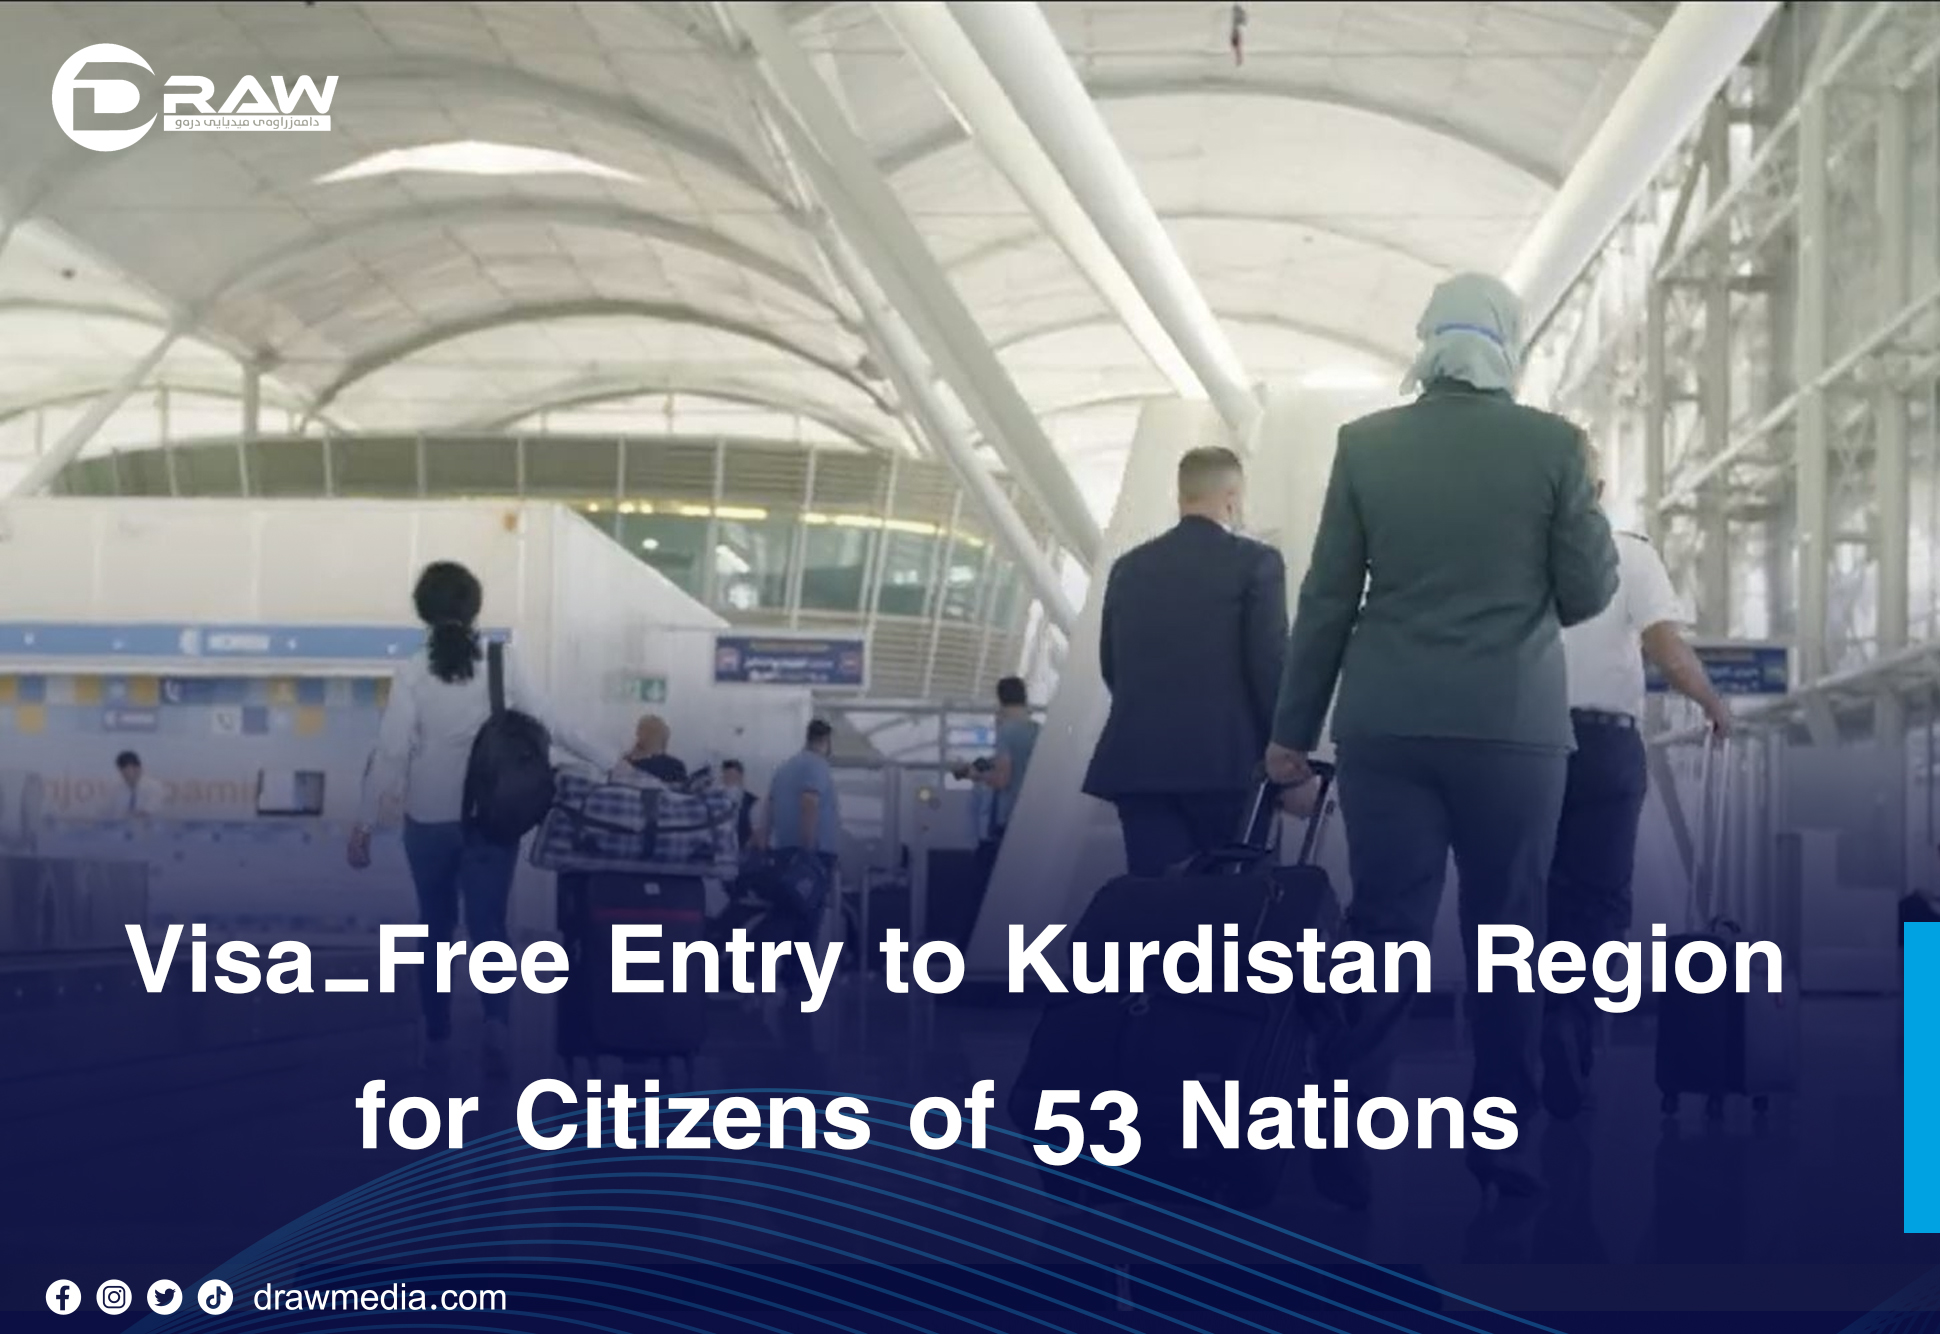 Draw Media- Visa-Free Entry to Kurdistan Region for Citizens of 53 Nations